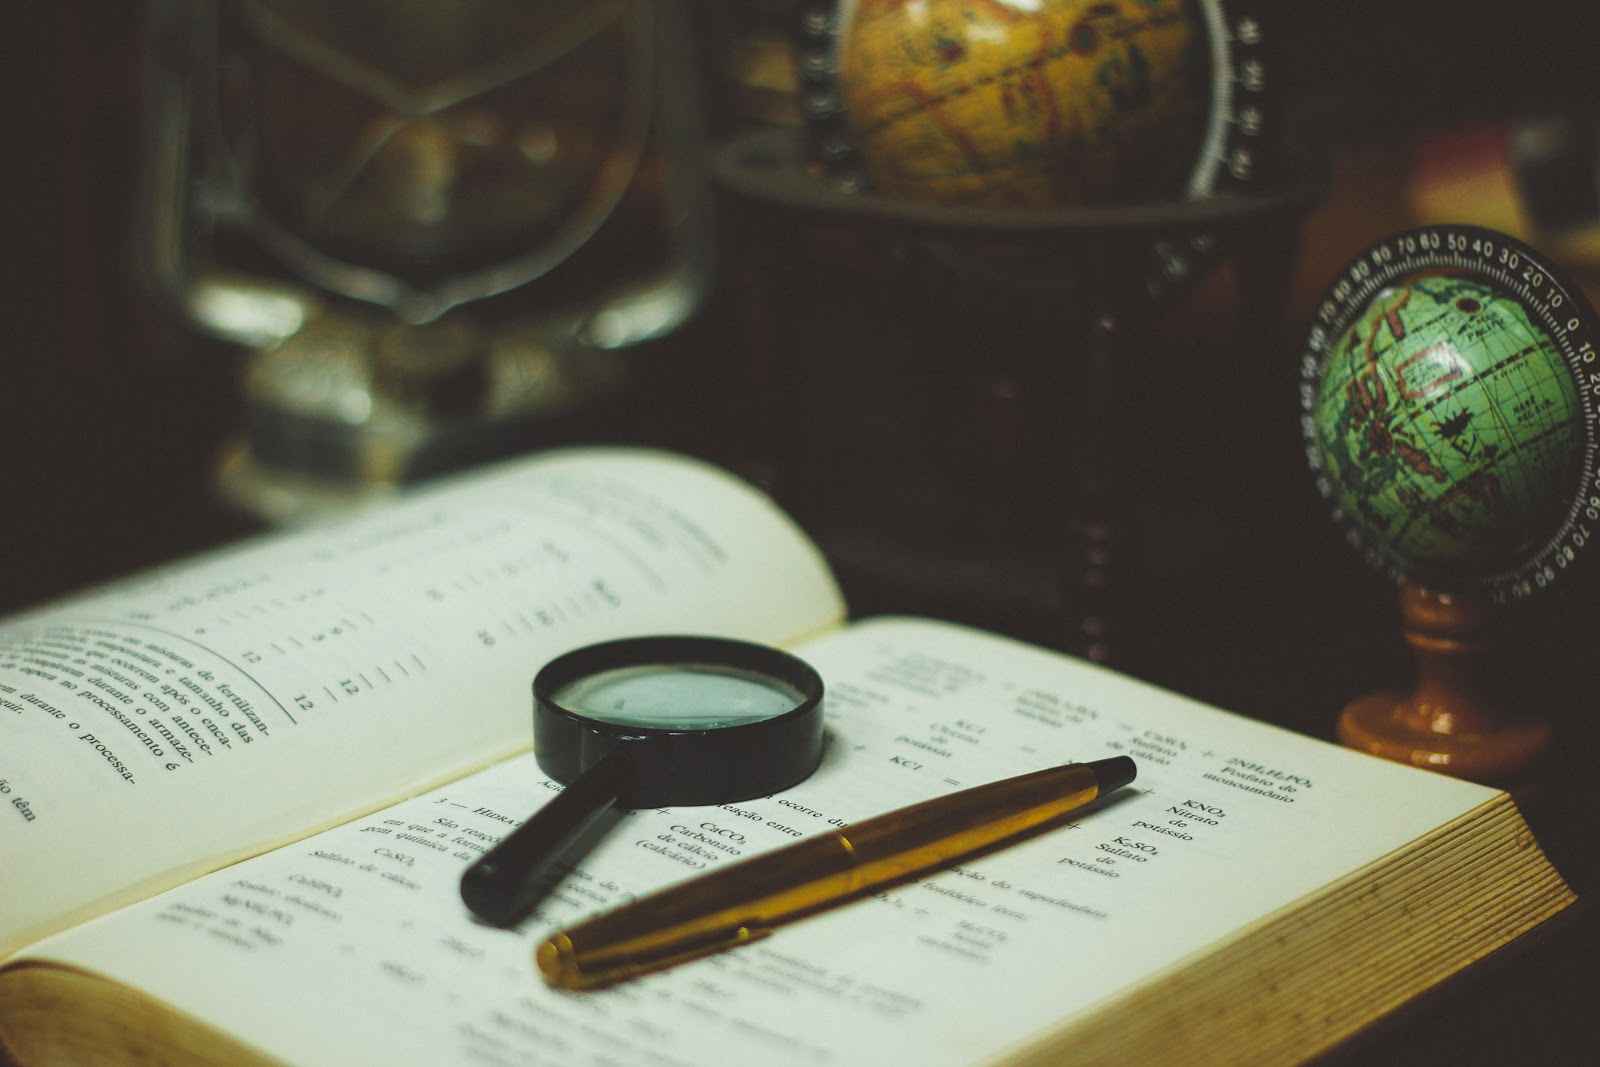 Magnifying glass & pen on a book